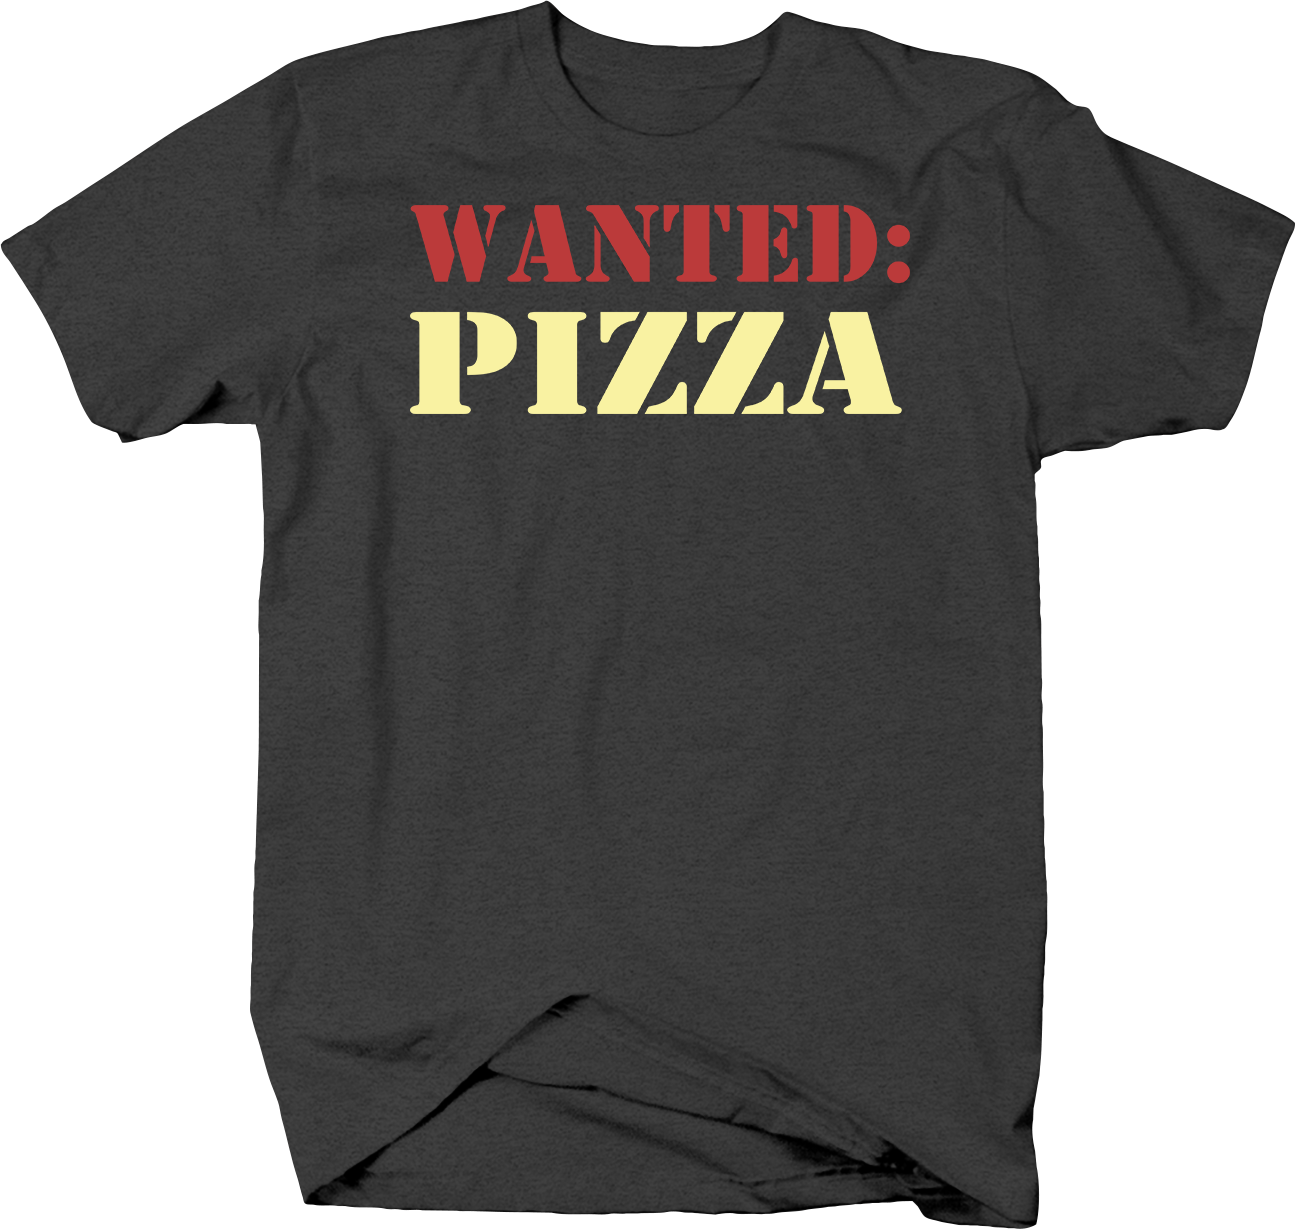 Wanted: Pizza Junk Food Snacks Hungry Nutrition Shirts for Men Large Dark Gray - image 1 of 2